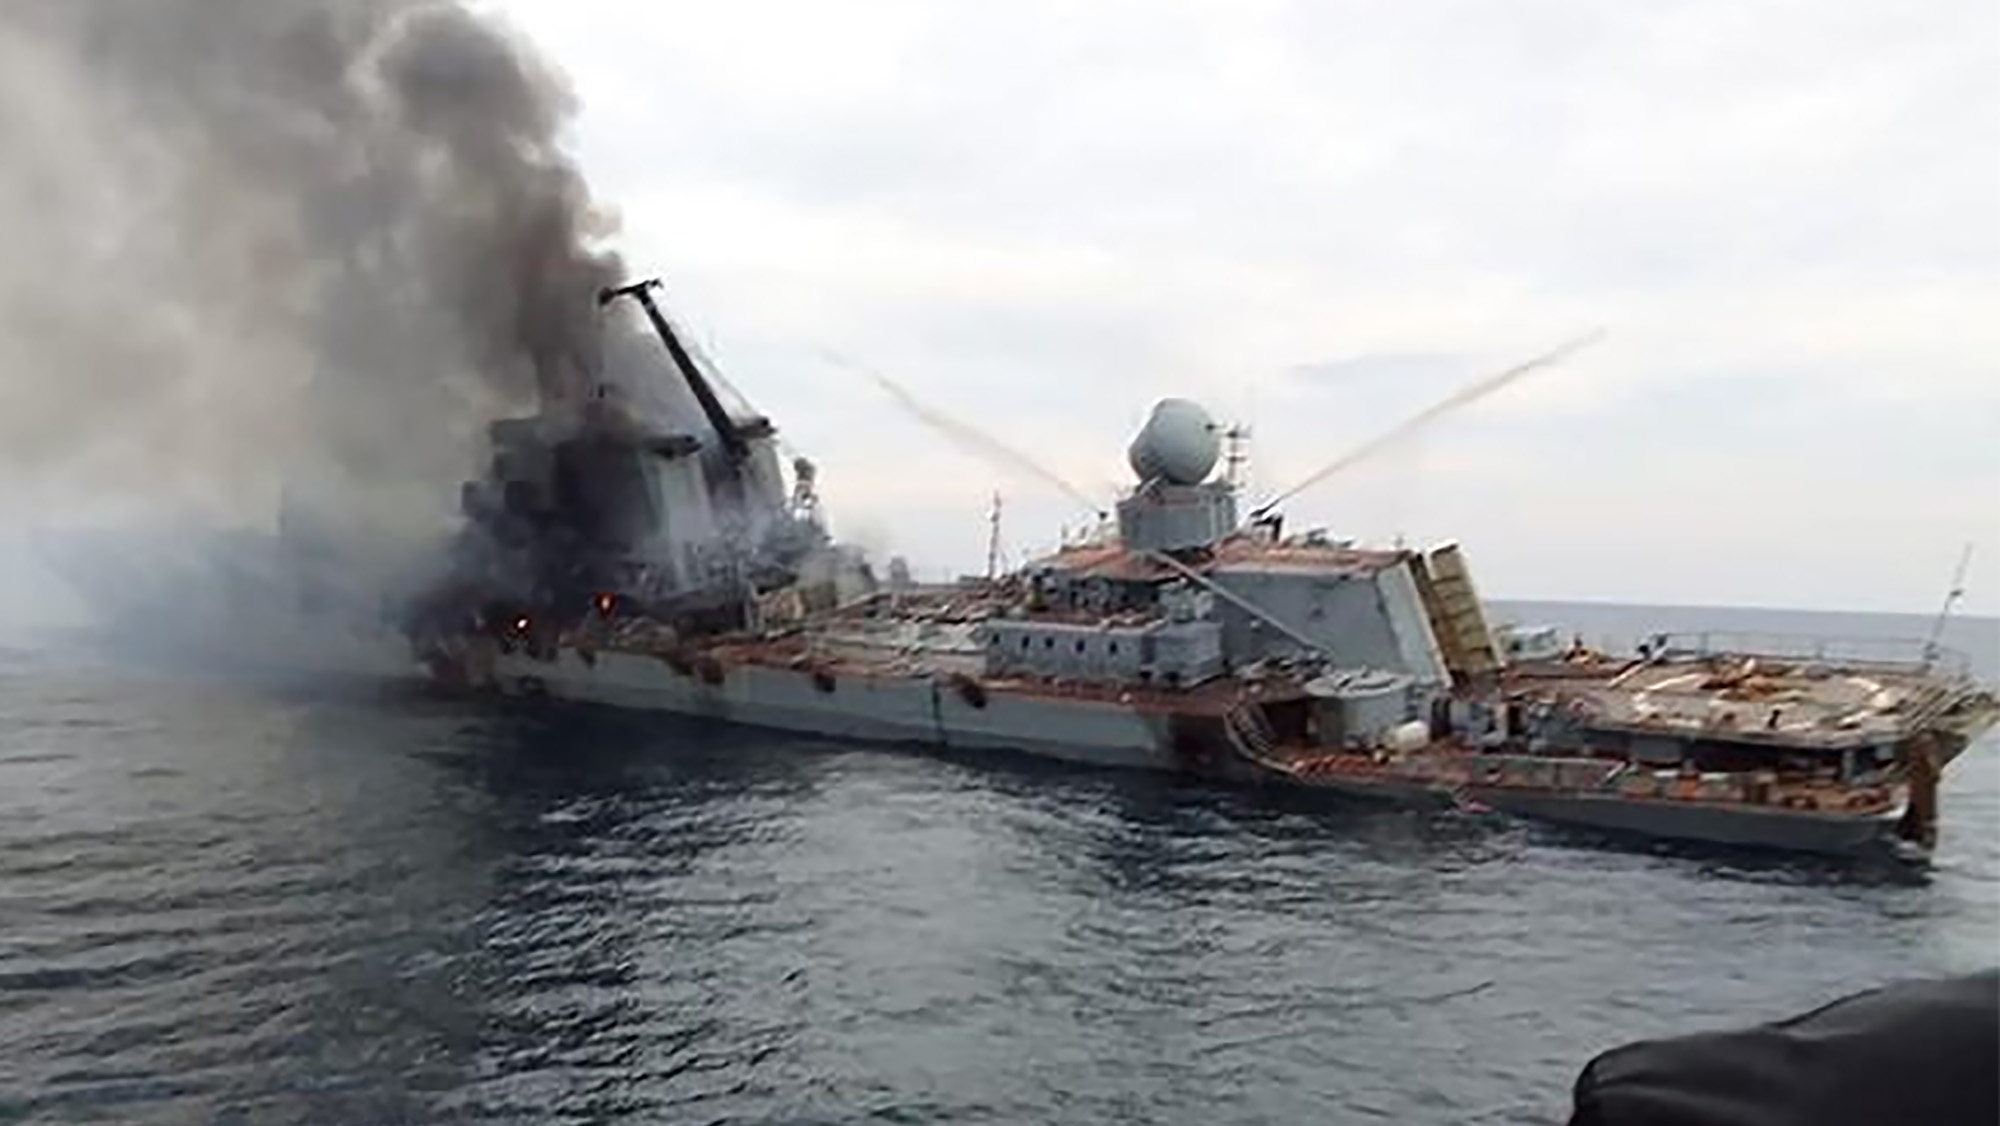 Images emerged early Monday, April 18 2022, on social media showing Russia's guided-missile cruiser, the Moskva, badly damaged and on fire in the hours before the ship sunk in the Black Sea on Thursday.